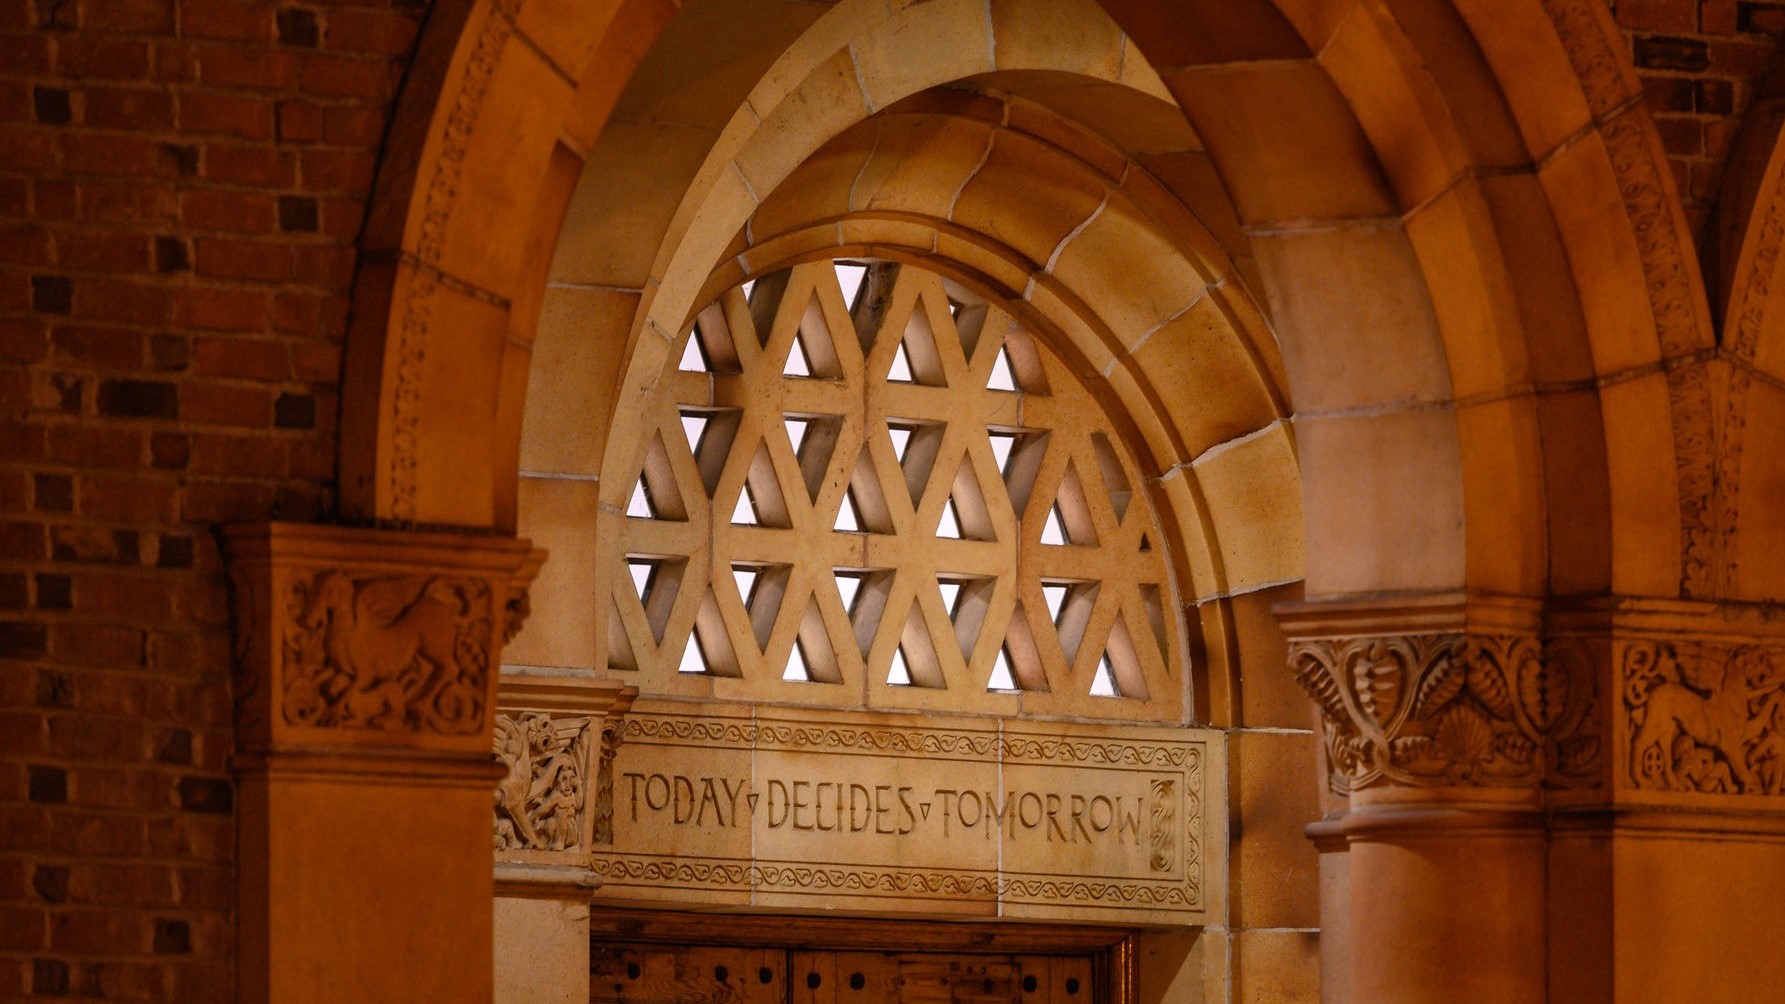 "Today Decides Tomorrow" inscribed above the main entrance to Kendall Hall